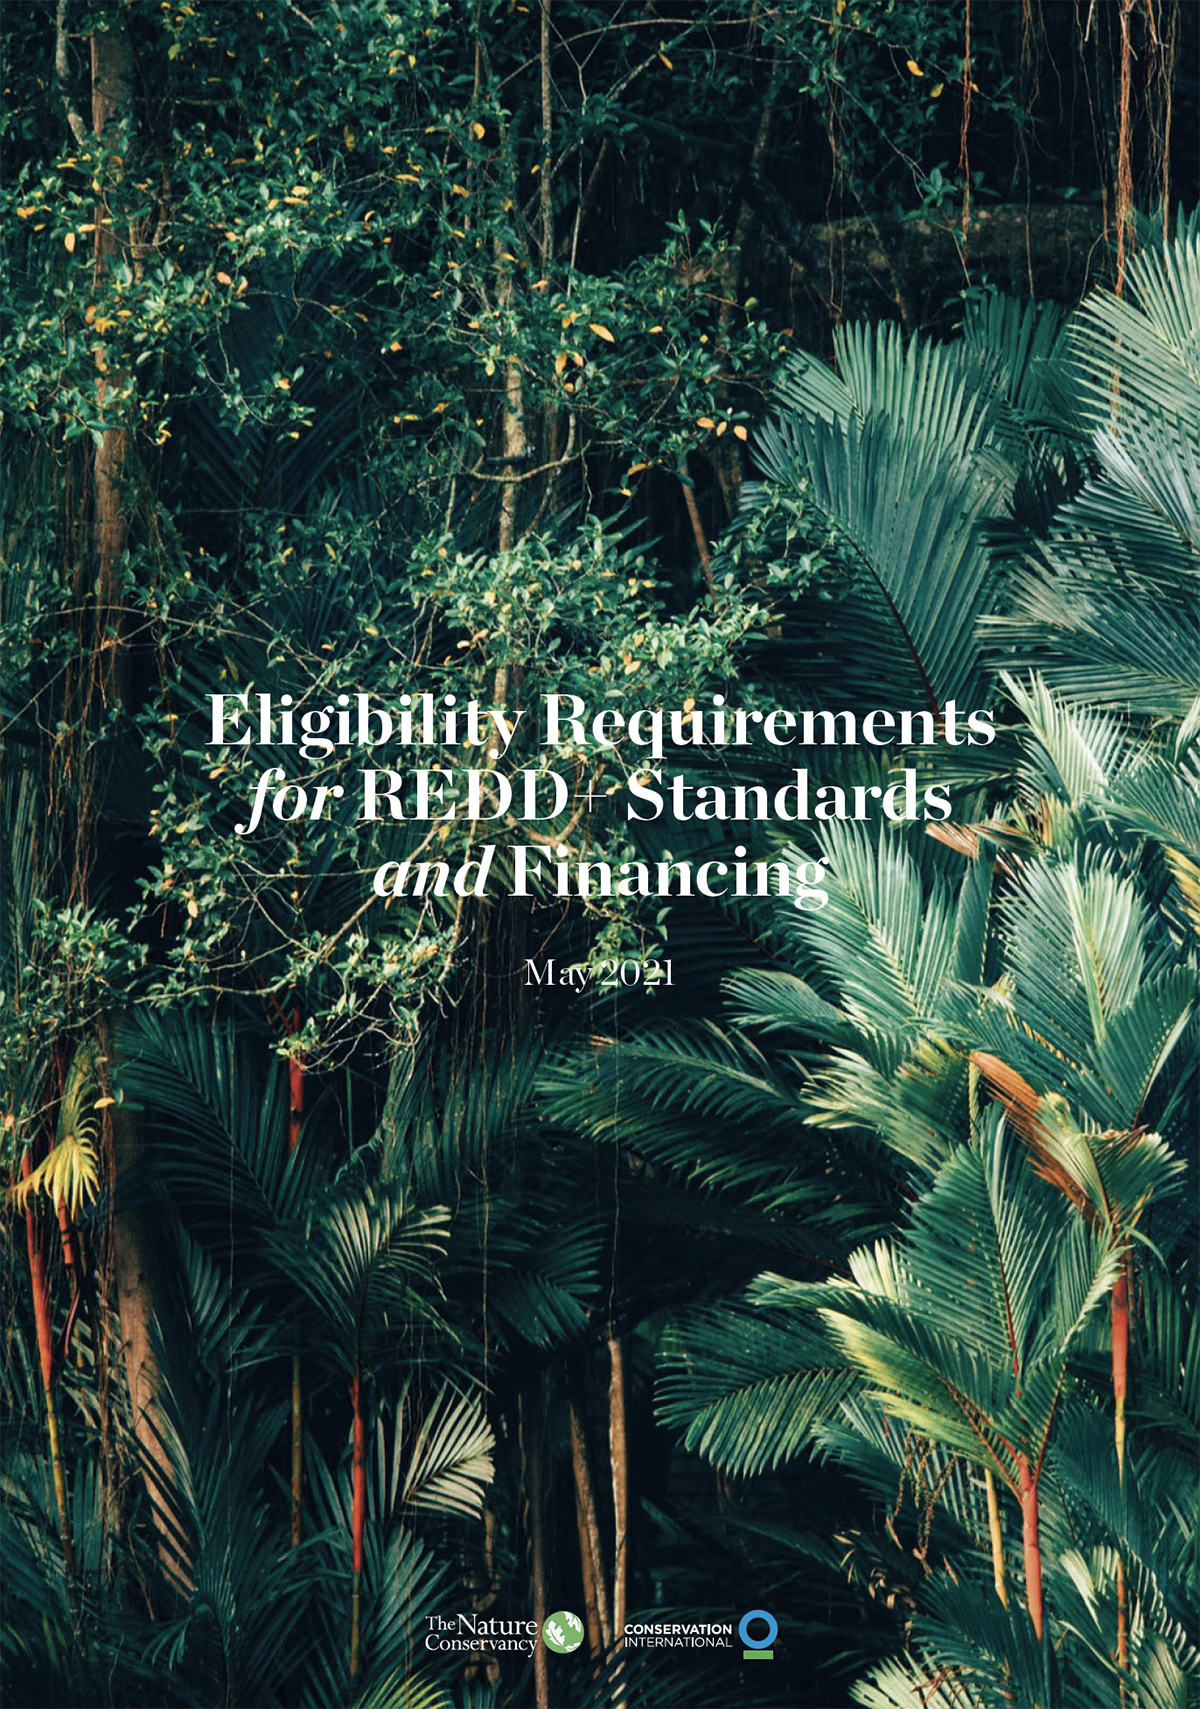 Cover of REDD+ Eligibility report.